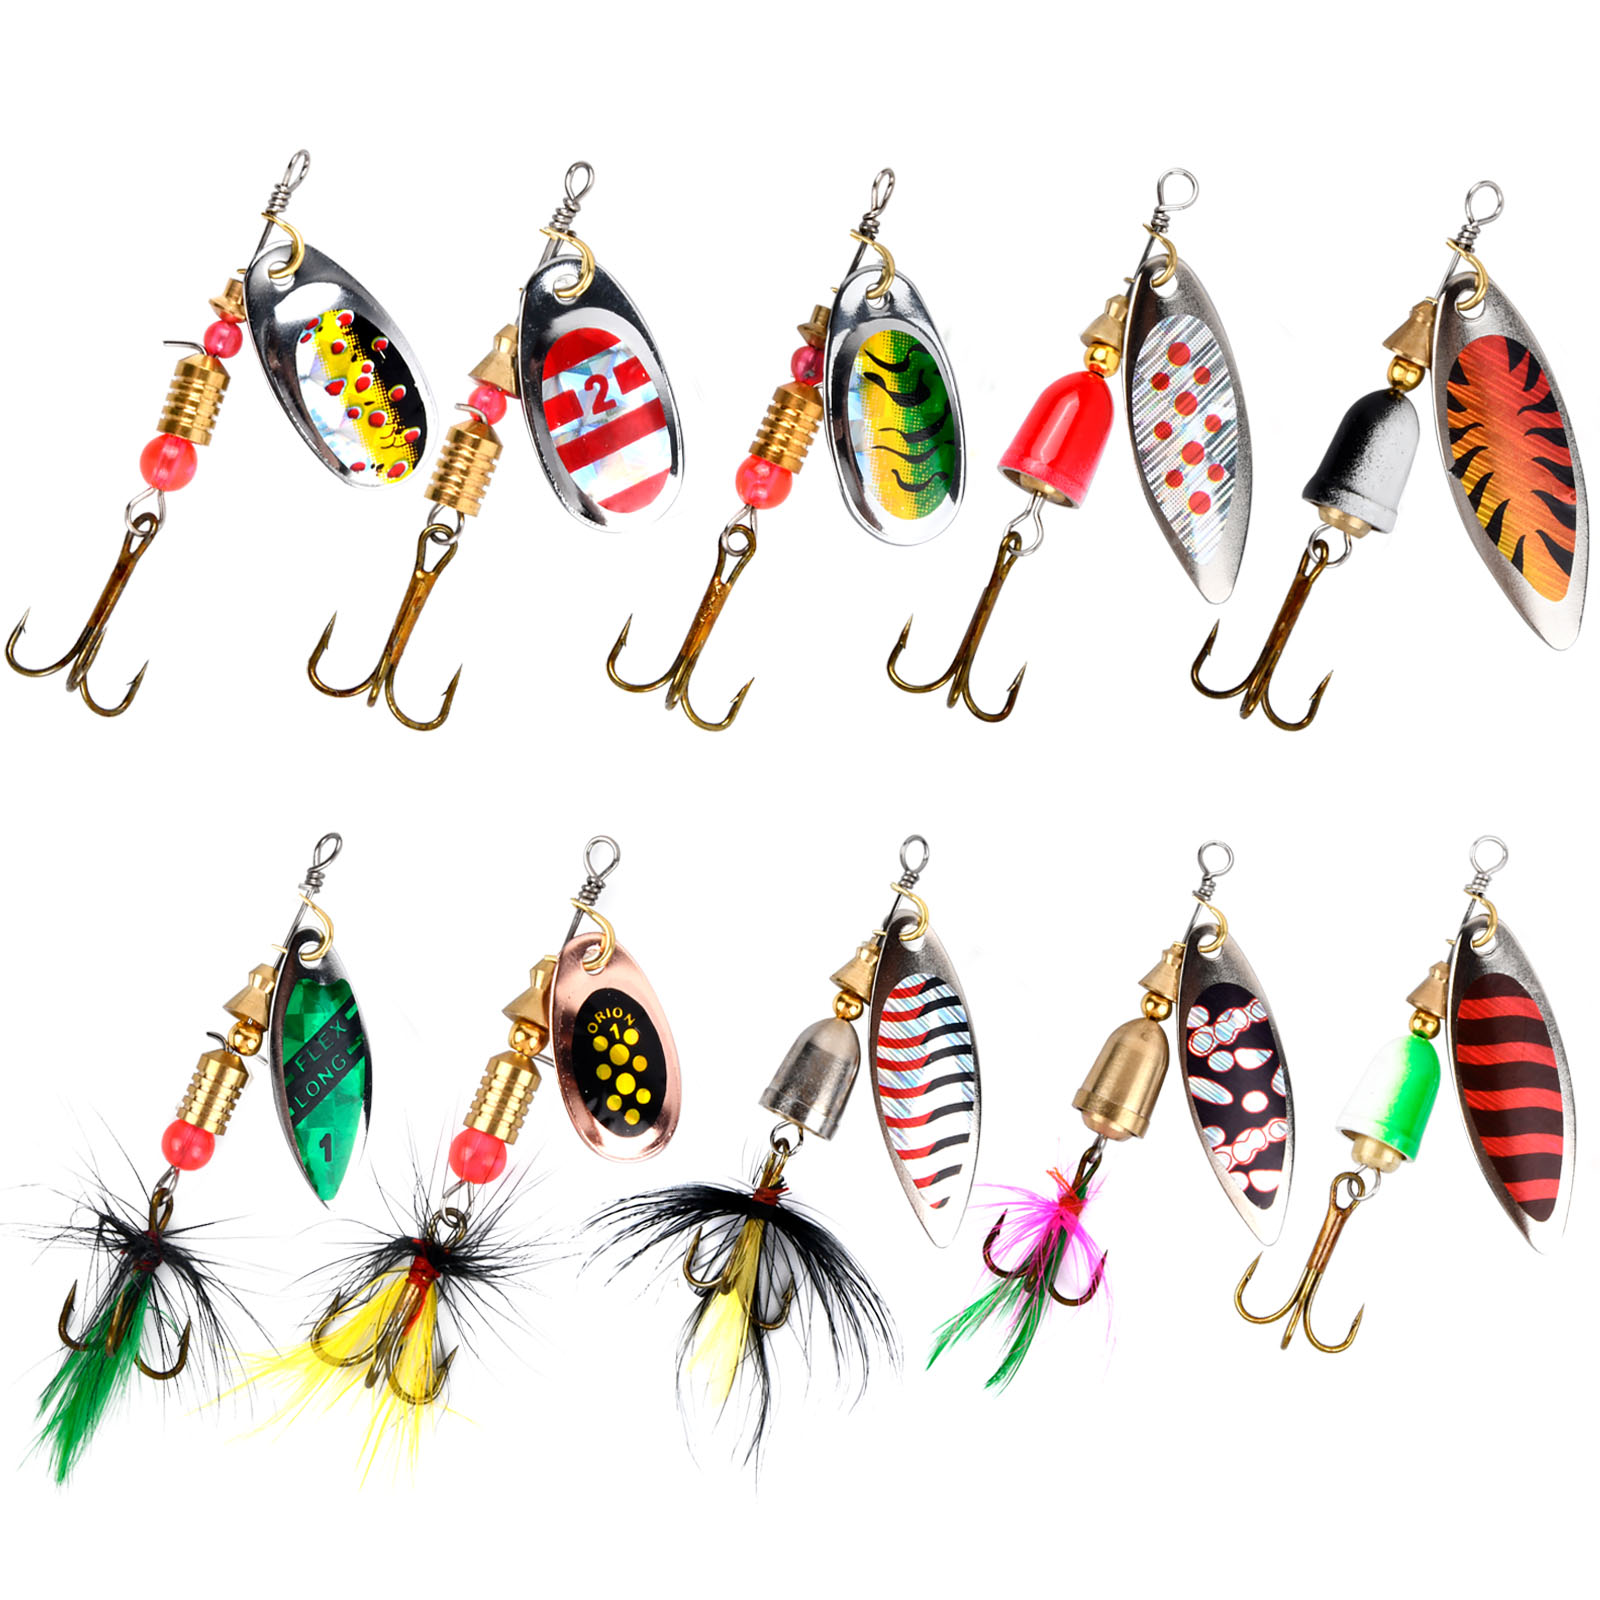 10pcs Premium Spinner Bait Set - 10 Artificial Fishing Lures with Treble  Hooks - Metal Baits for Bass, Trout, and Salmon - Rotating Fishing  Accessorie